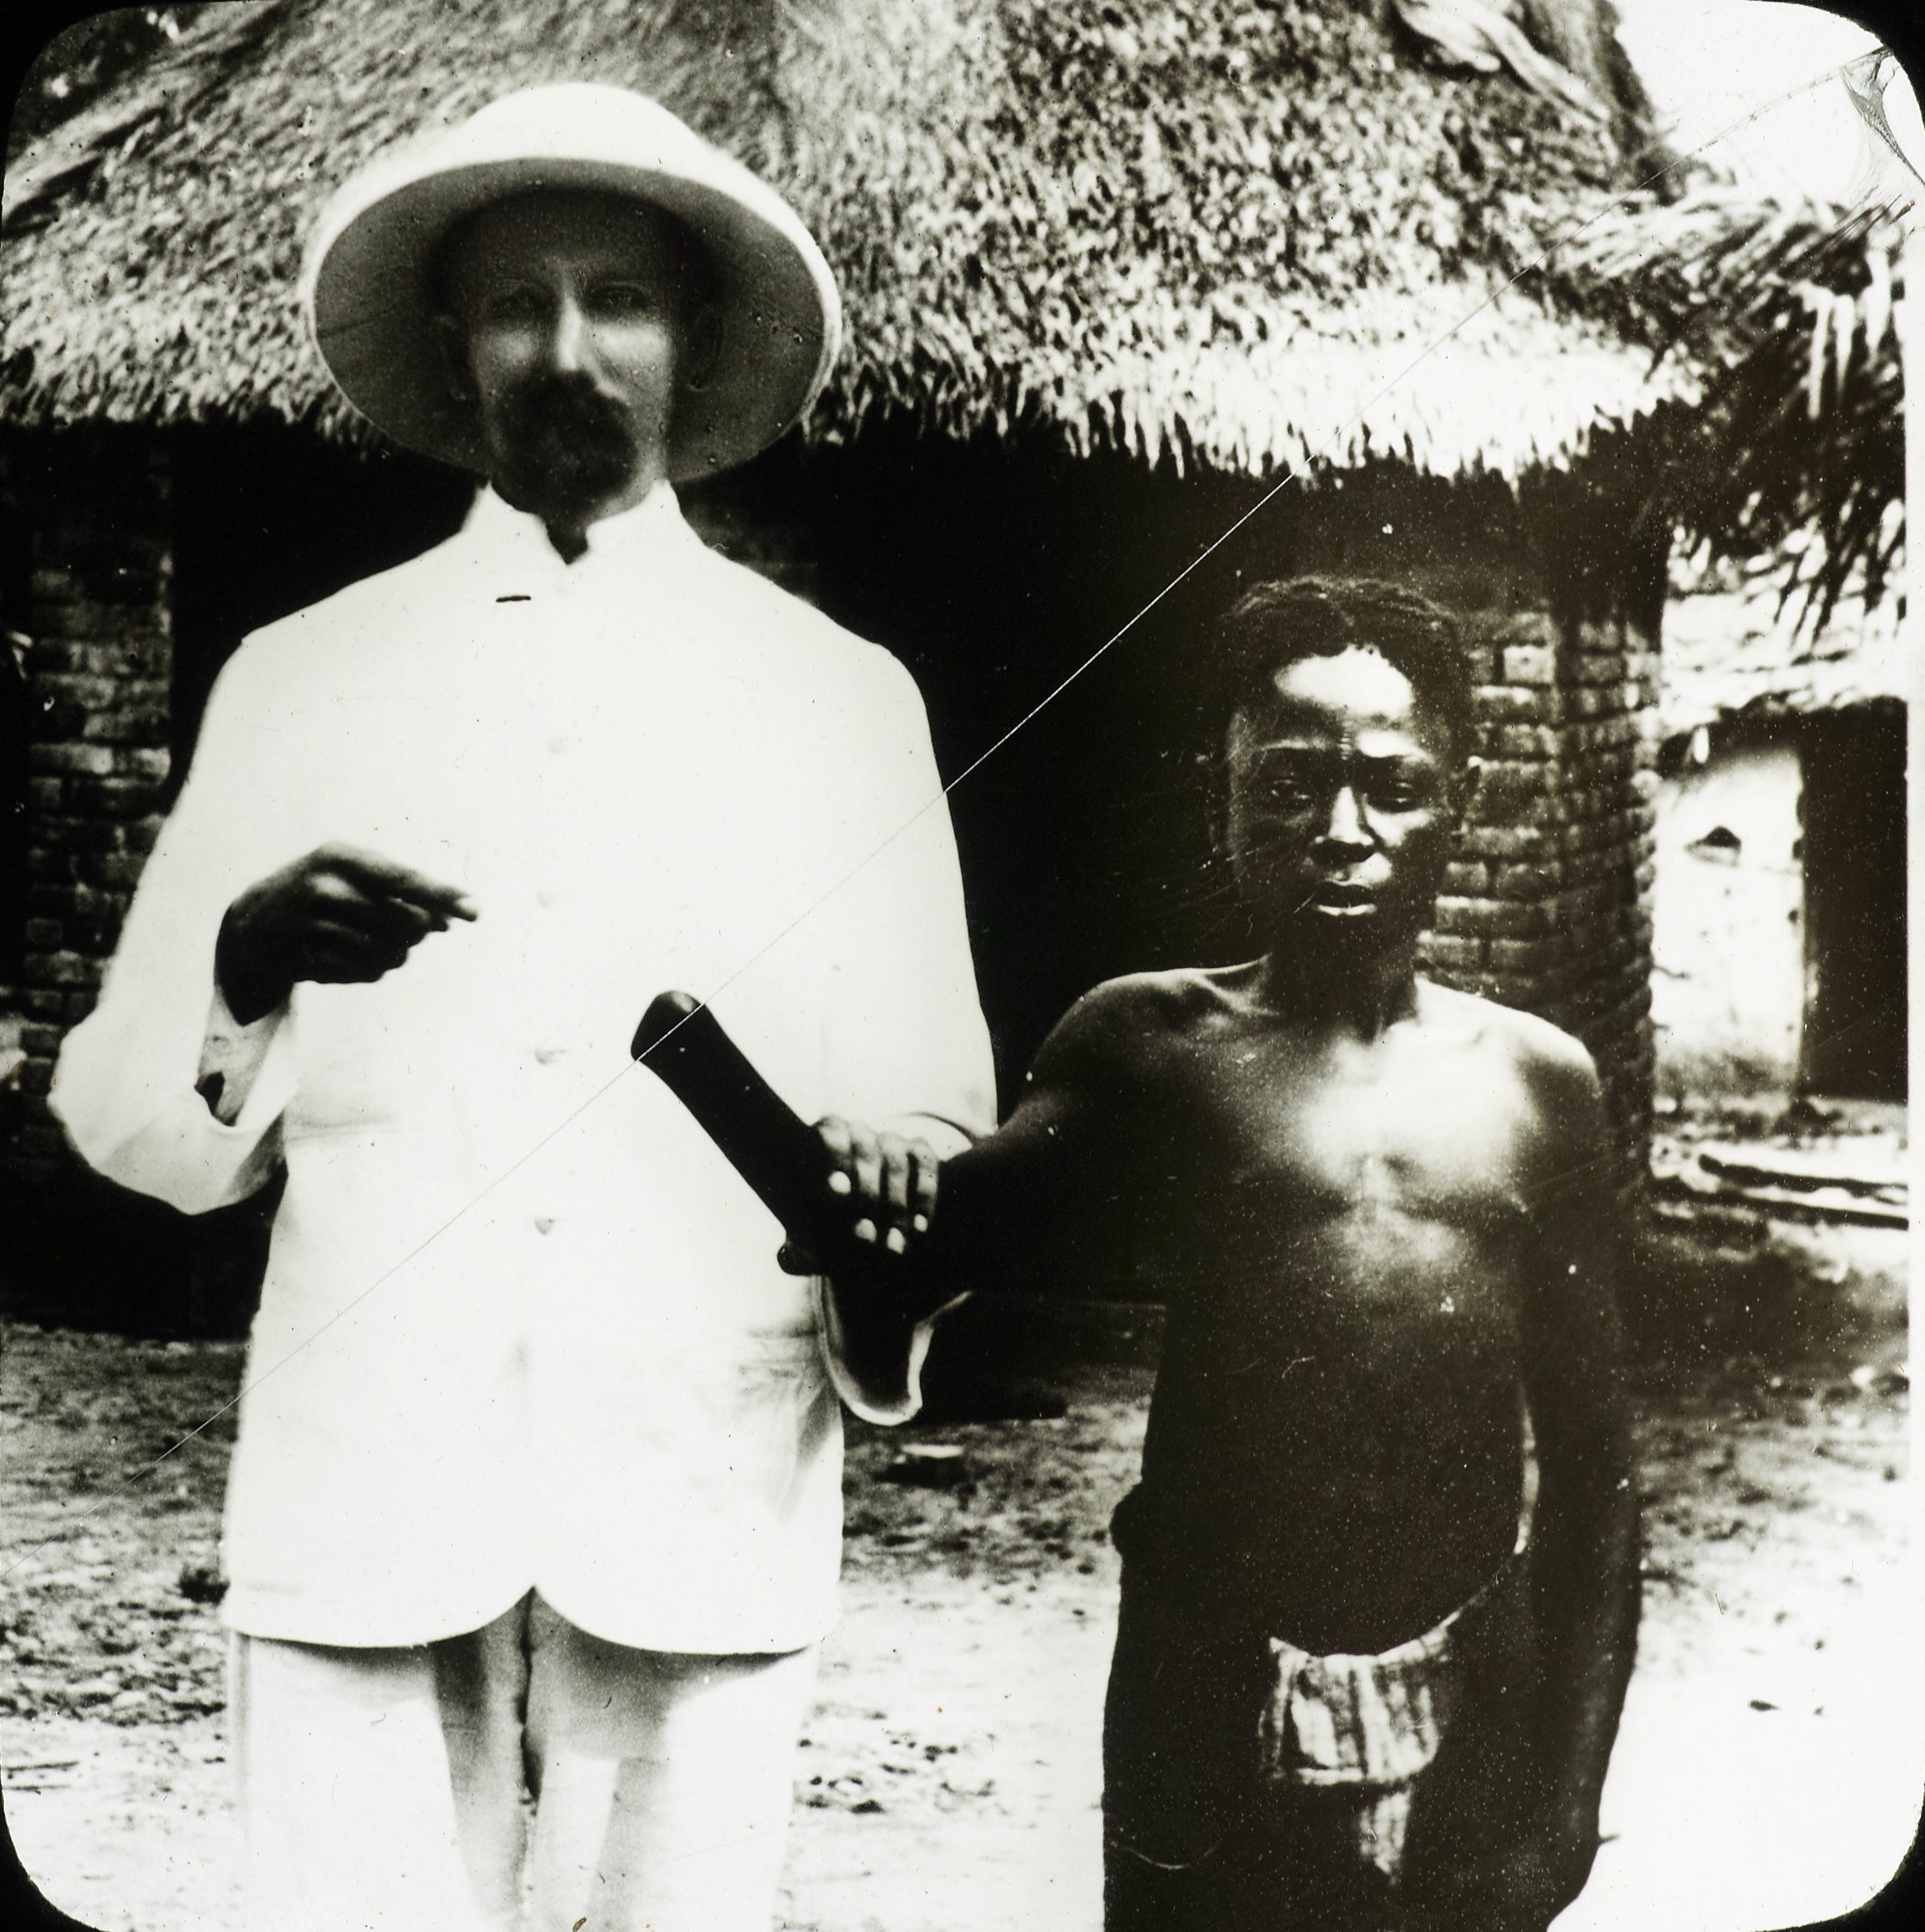 A European missionary shows a young boy with his hand cut off in Belgian Congo in 1903. The territory was privately owned by King Leopold II of Belgium, and the native people were used in forced labor to pay off the Kings debts. If they did not meet their quota, hired mercenaries would routinely chop off the limbs of the workers children, so the workers could still work. The workers were basically slaves, suffering from horrible atrocities Leopold's private army would do at will. The territory was called the Congo Free State, and was anything but. When it finally came out what was going on after almost 25 years, Leopold II gave up control, and things finally changed. However, this was one of the last areas that instituted forms of slavery on a country wide scale, nearly 50 years after the US eliminated it. It also employed forms of genocide, and its possible up to 20 million people died during the 25 or so years it went on. Exact figures are unknown, but it was bad, really bad.